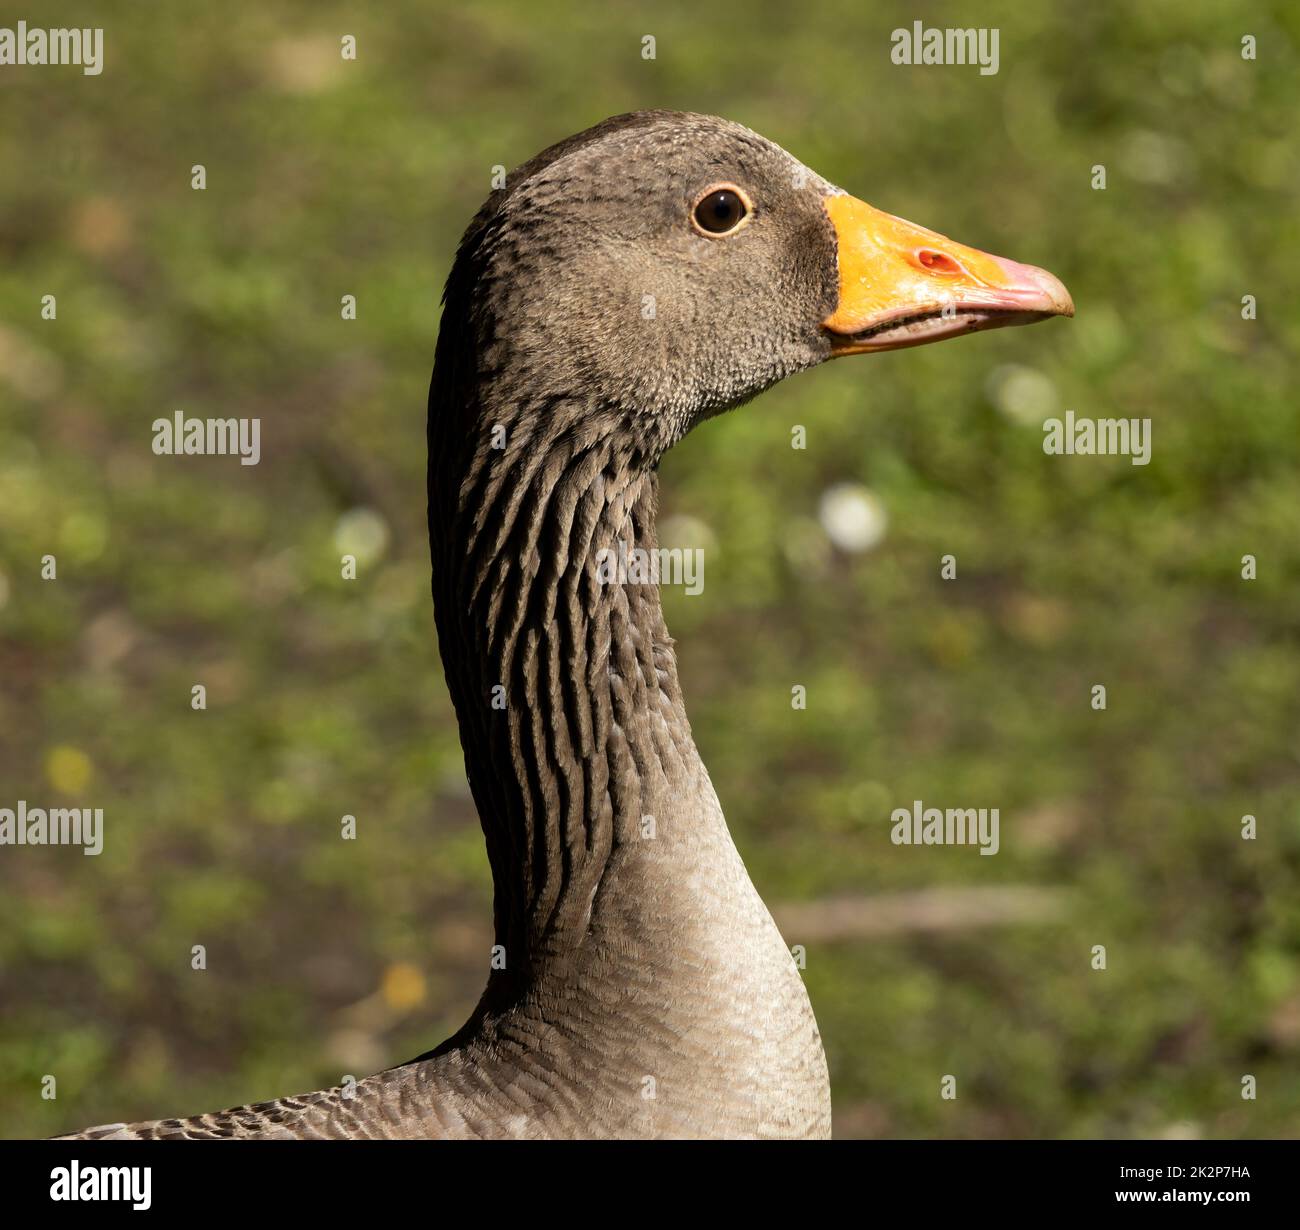 The Greylag Goose is now considered to be the ancestor of most domesticated Geese. There are local resident birds and a large number of winter migrant Stock Photo